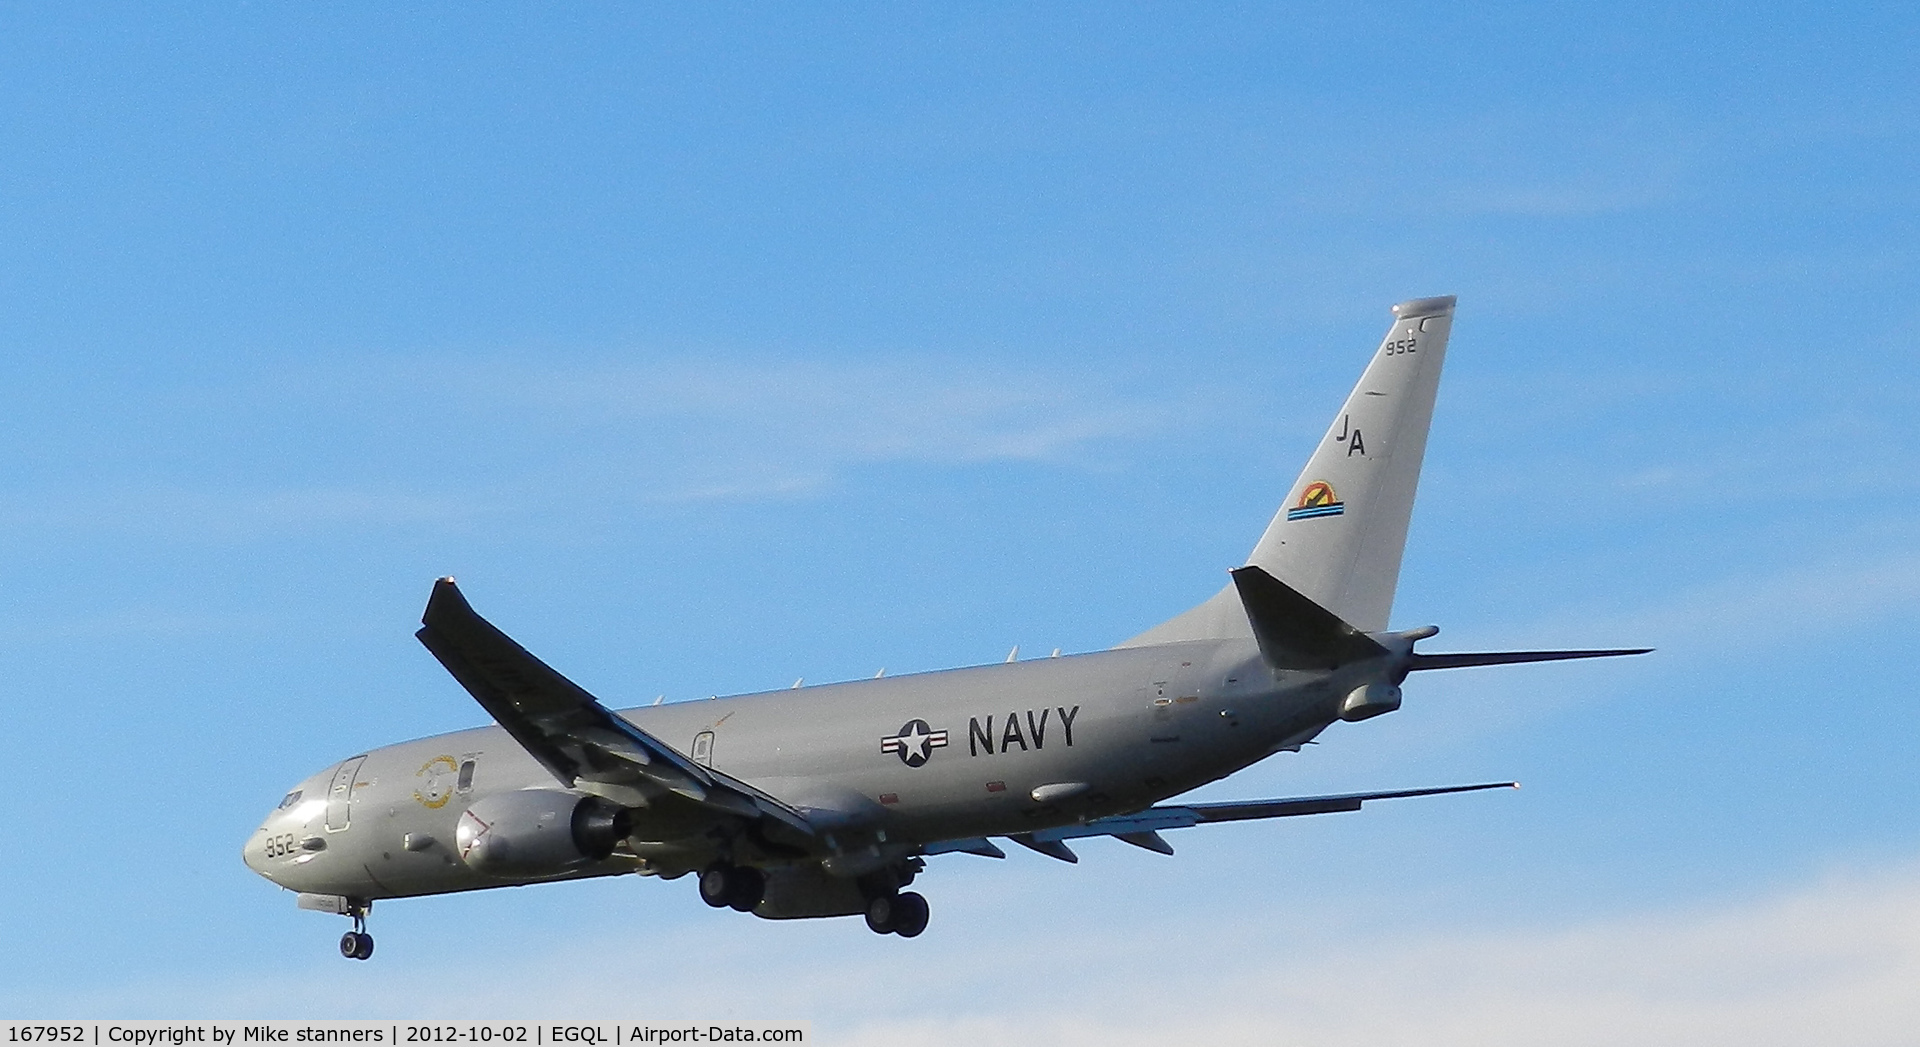 167952, 2011 Boeing P-8A Poseidon C/N 40594, VX-1 P-8A Poseidon ,First pic in the database